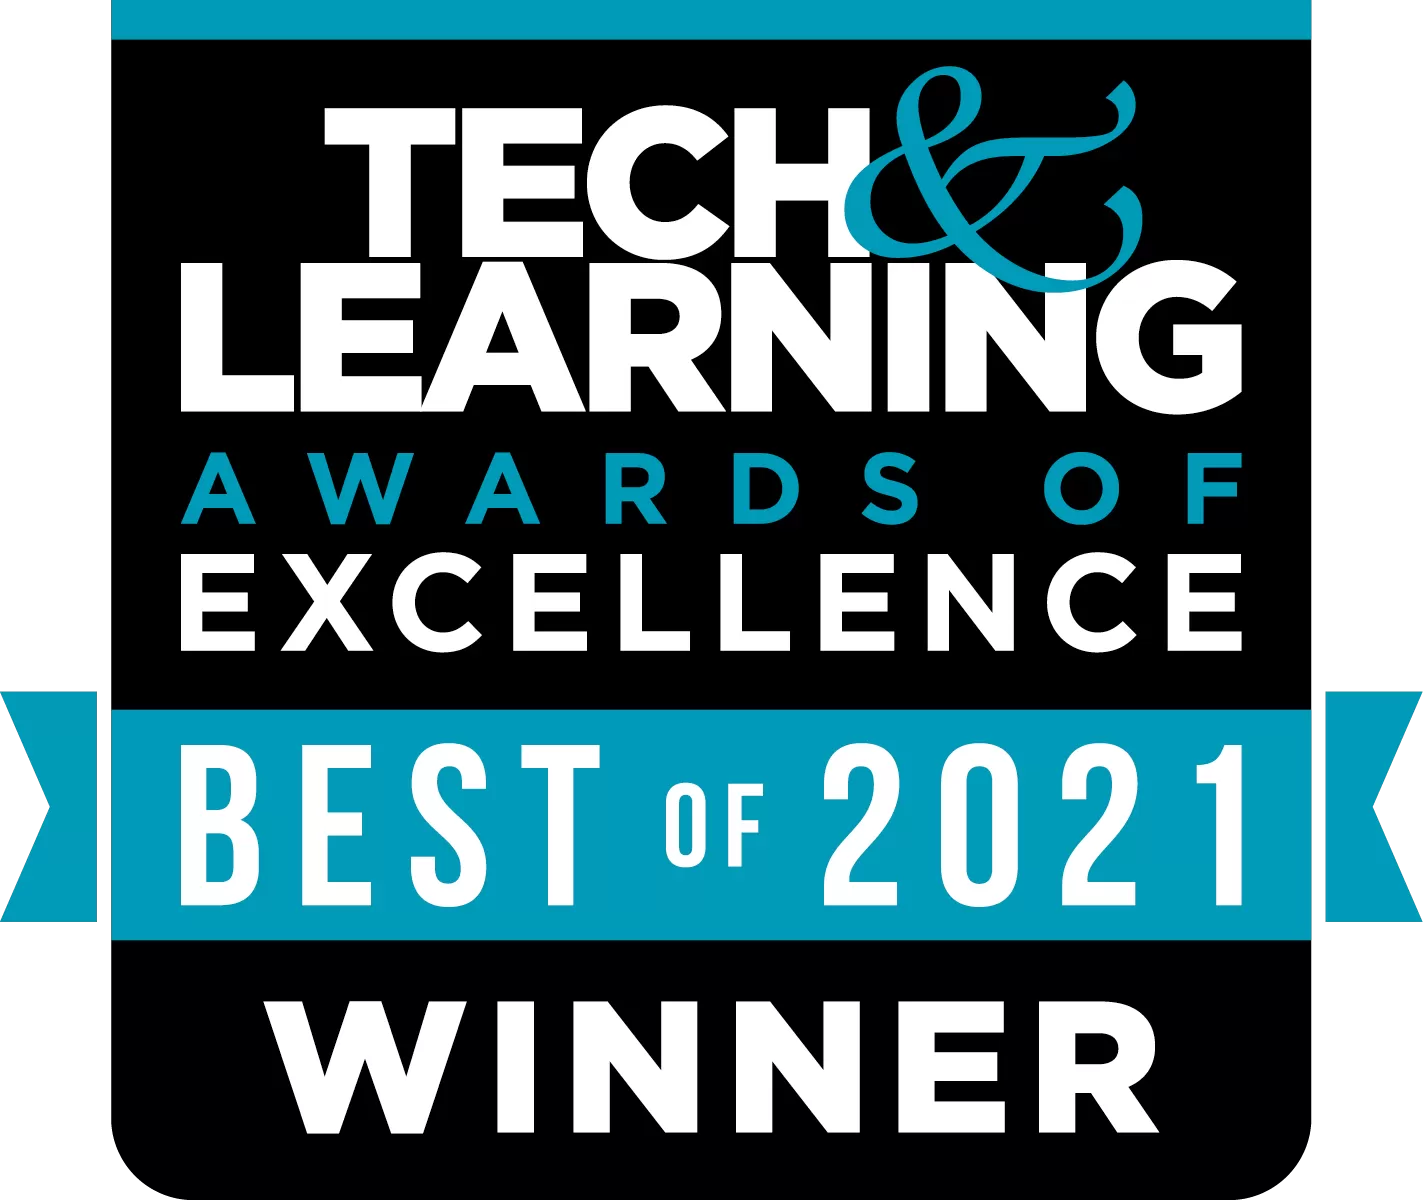 tech and learning awards of excellence best of 2021 Winner!